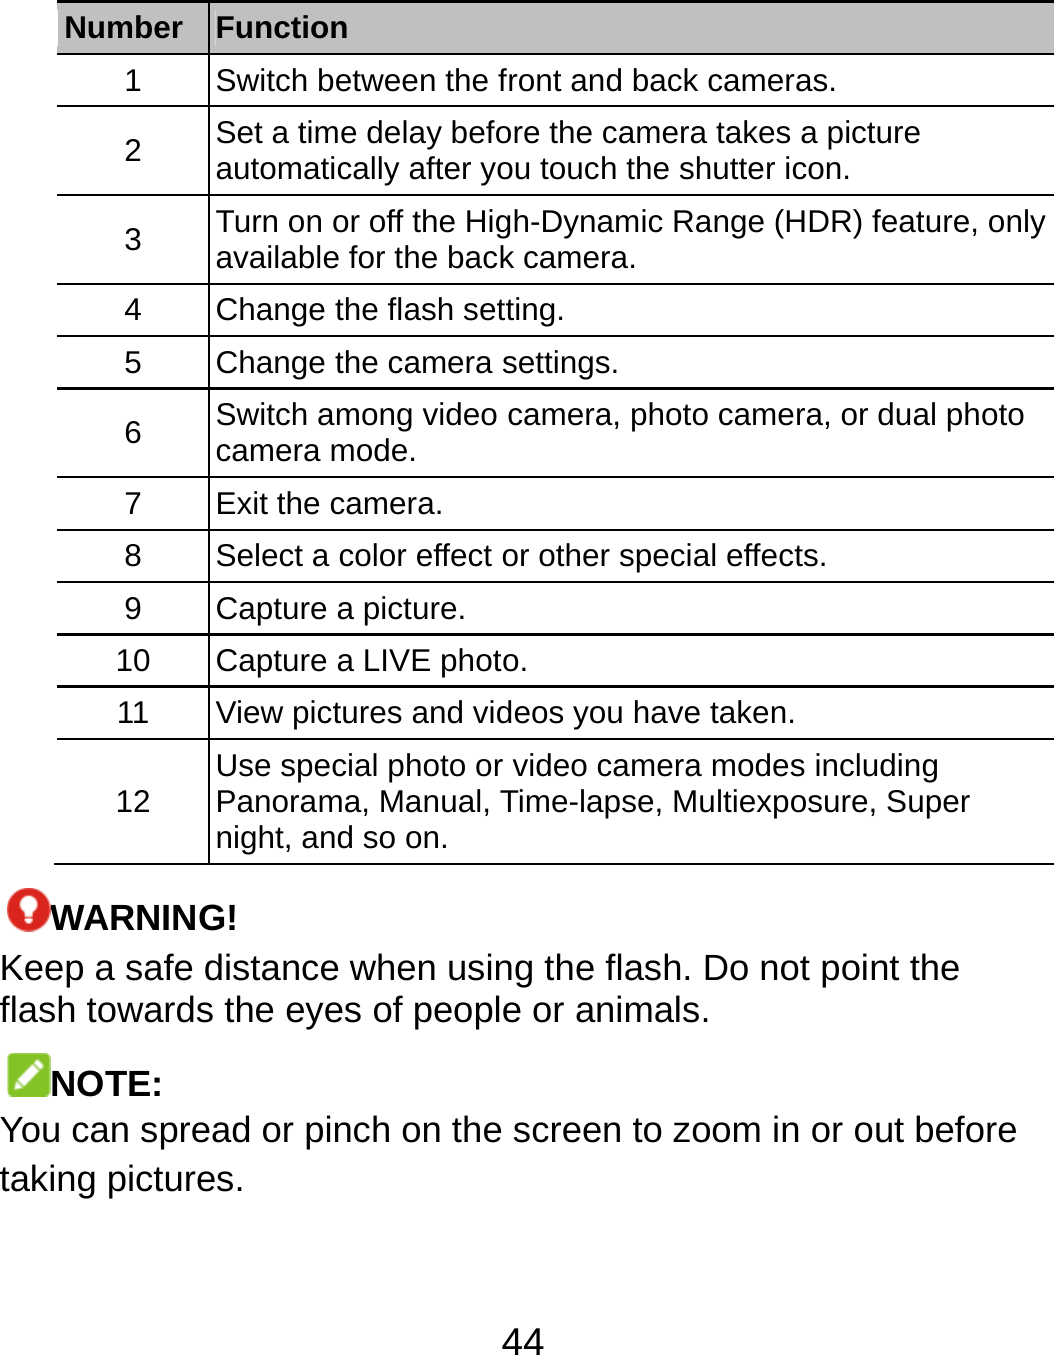  44 Number  Function 1  Switch between the front and back cameras. 2  Set a time delay before the camera takes a picture automatically after you touch the shutter icon. 3  Turn on or off the High-Dynamic Range (HDR) feature, only available for the back camera. 4  Change the flash setting. 5  Change the camera settings. 6  Switch among video camera, photo camera, or dual photo camera mode. 7 Exit the camera. 8  Select a color effect or other special effects. 9 Capture a picture. 10  Capture a LIVE photo. 11  View pictures and videos you have taken. 12  Use special photo or video camera modes including Panorama, Manual, Time-lapse, Multiexposure, Super night, and so on.   WARNING! Keep a safe distance when using the flash. Do not point the flash towards the eyes of people or animals. NOTE: You can spread or pinch on the screen to zoom in or out before taking pictures.  